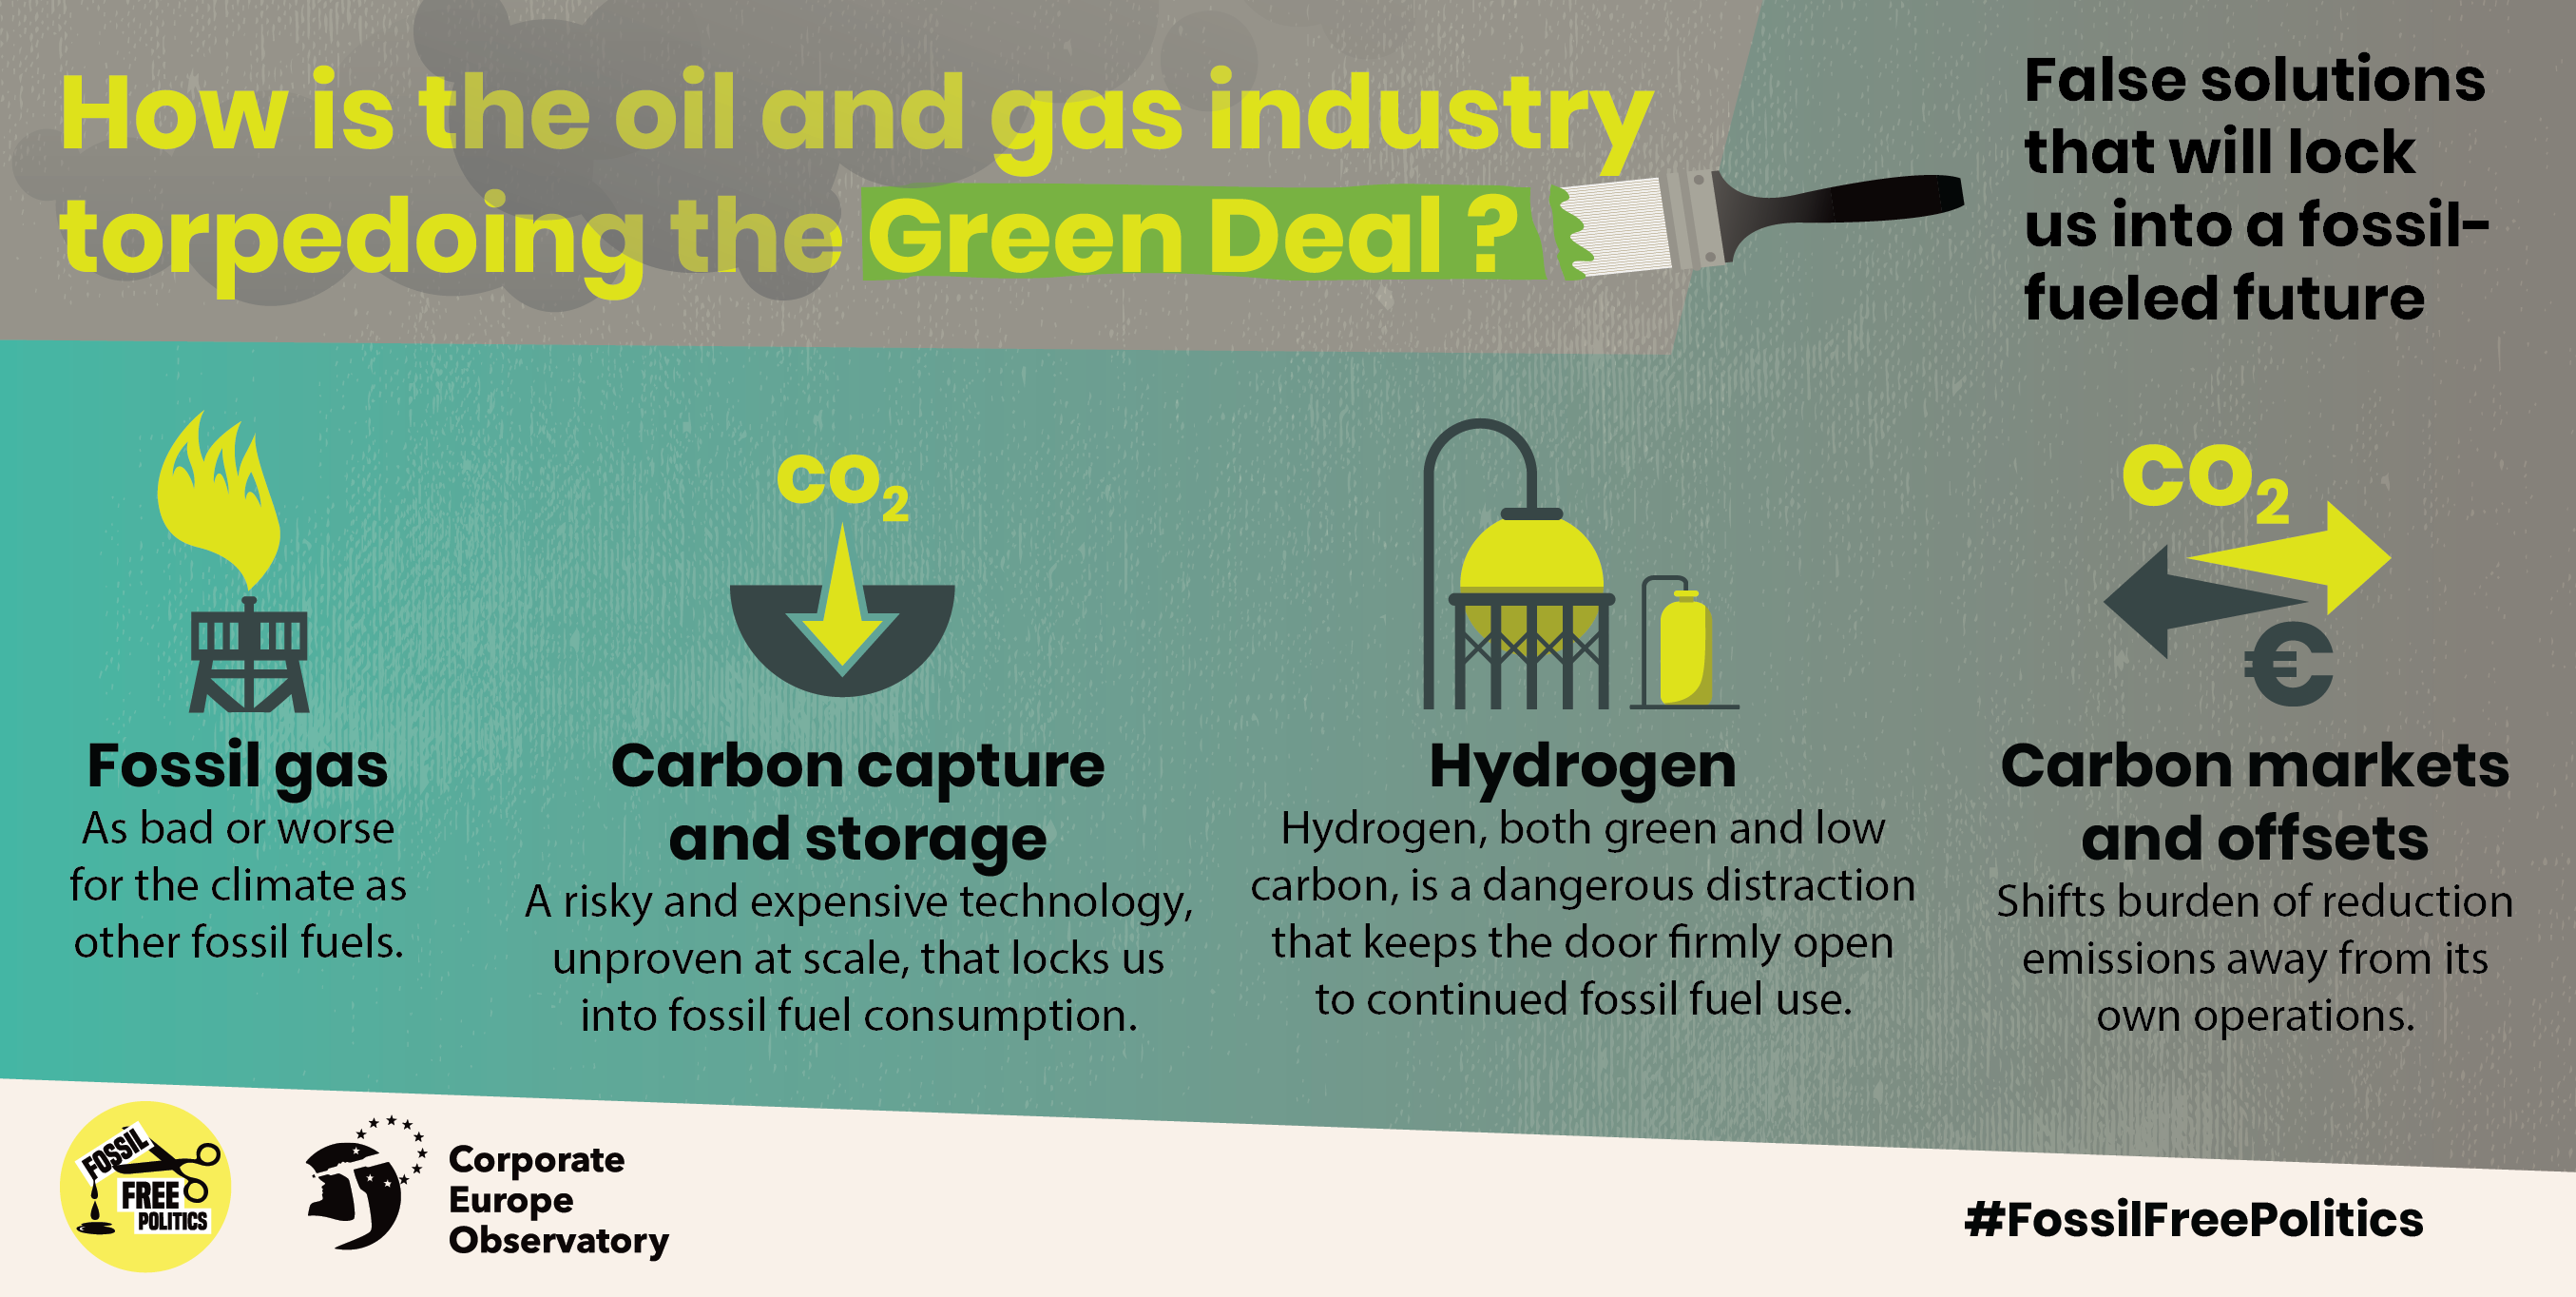 Disclosed: intense fossil industry lobby undermines EU Green Deal